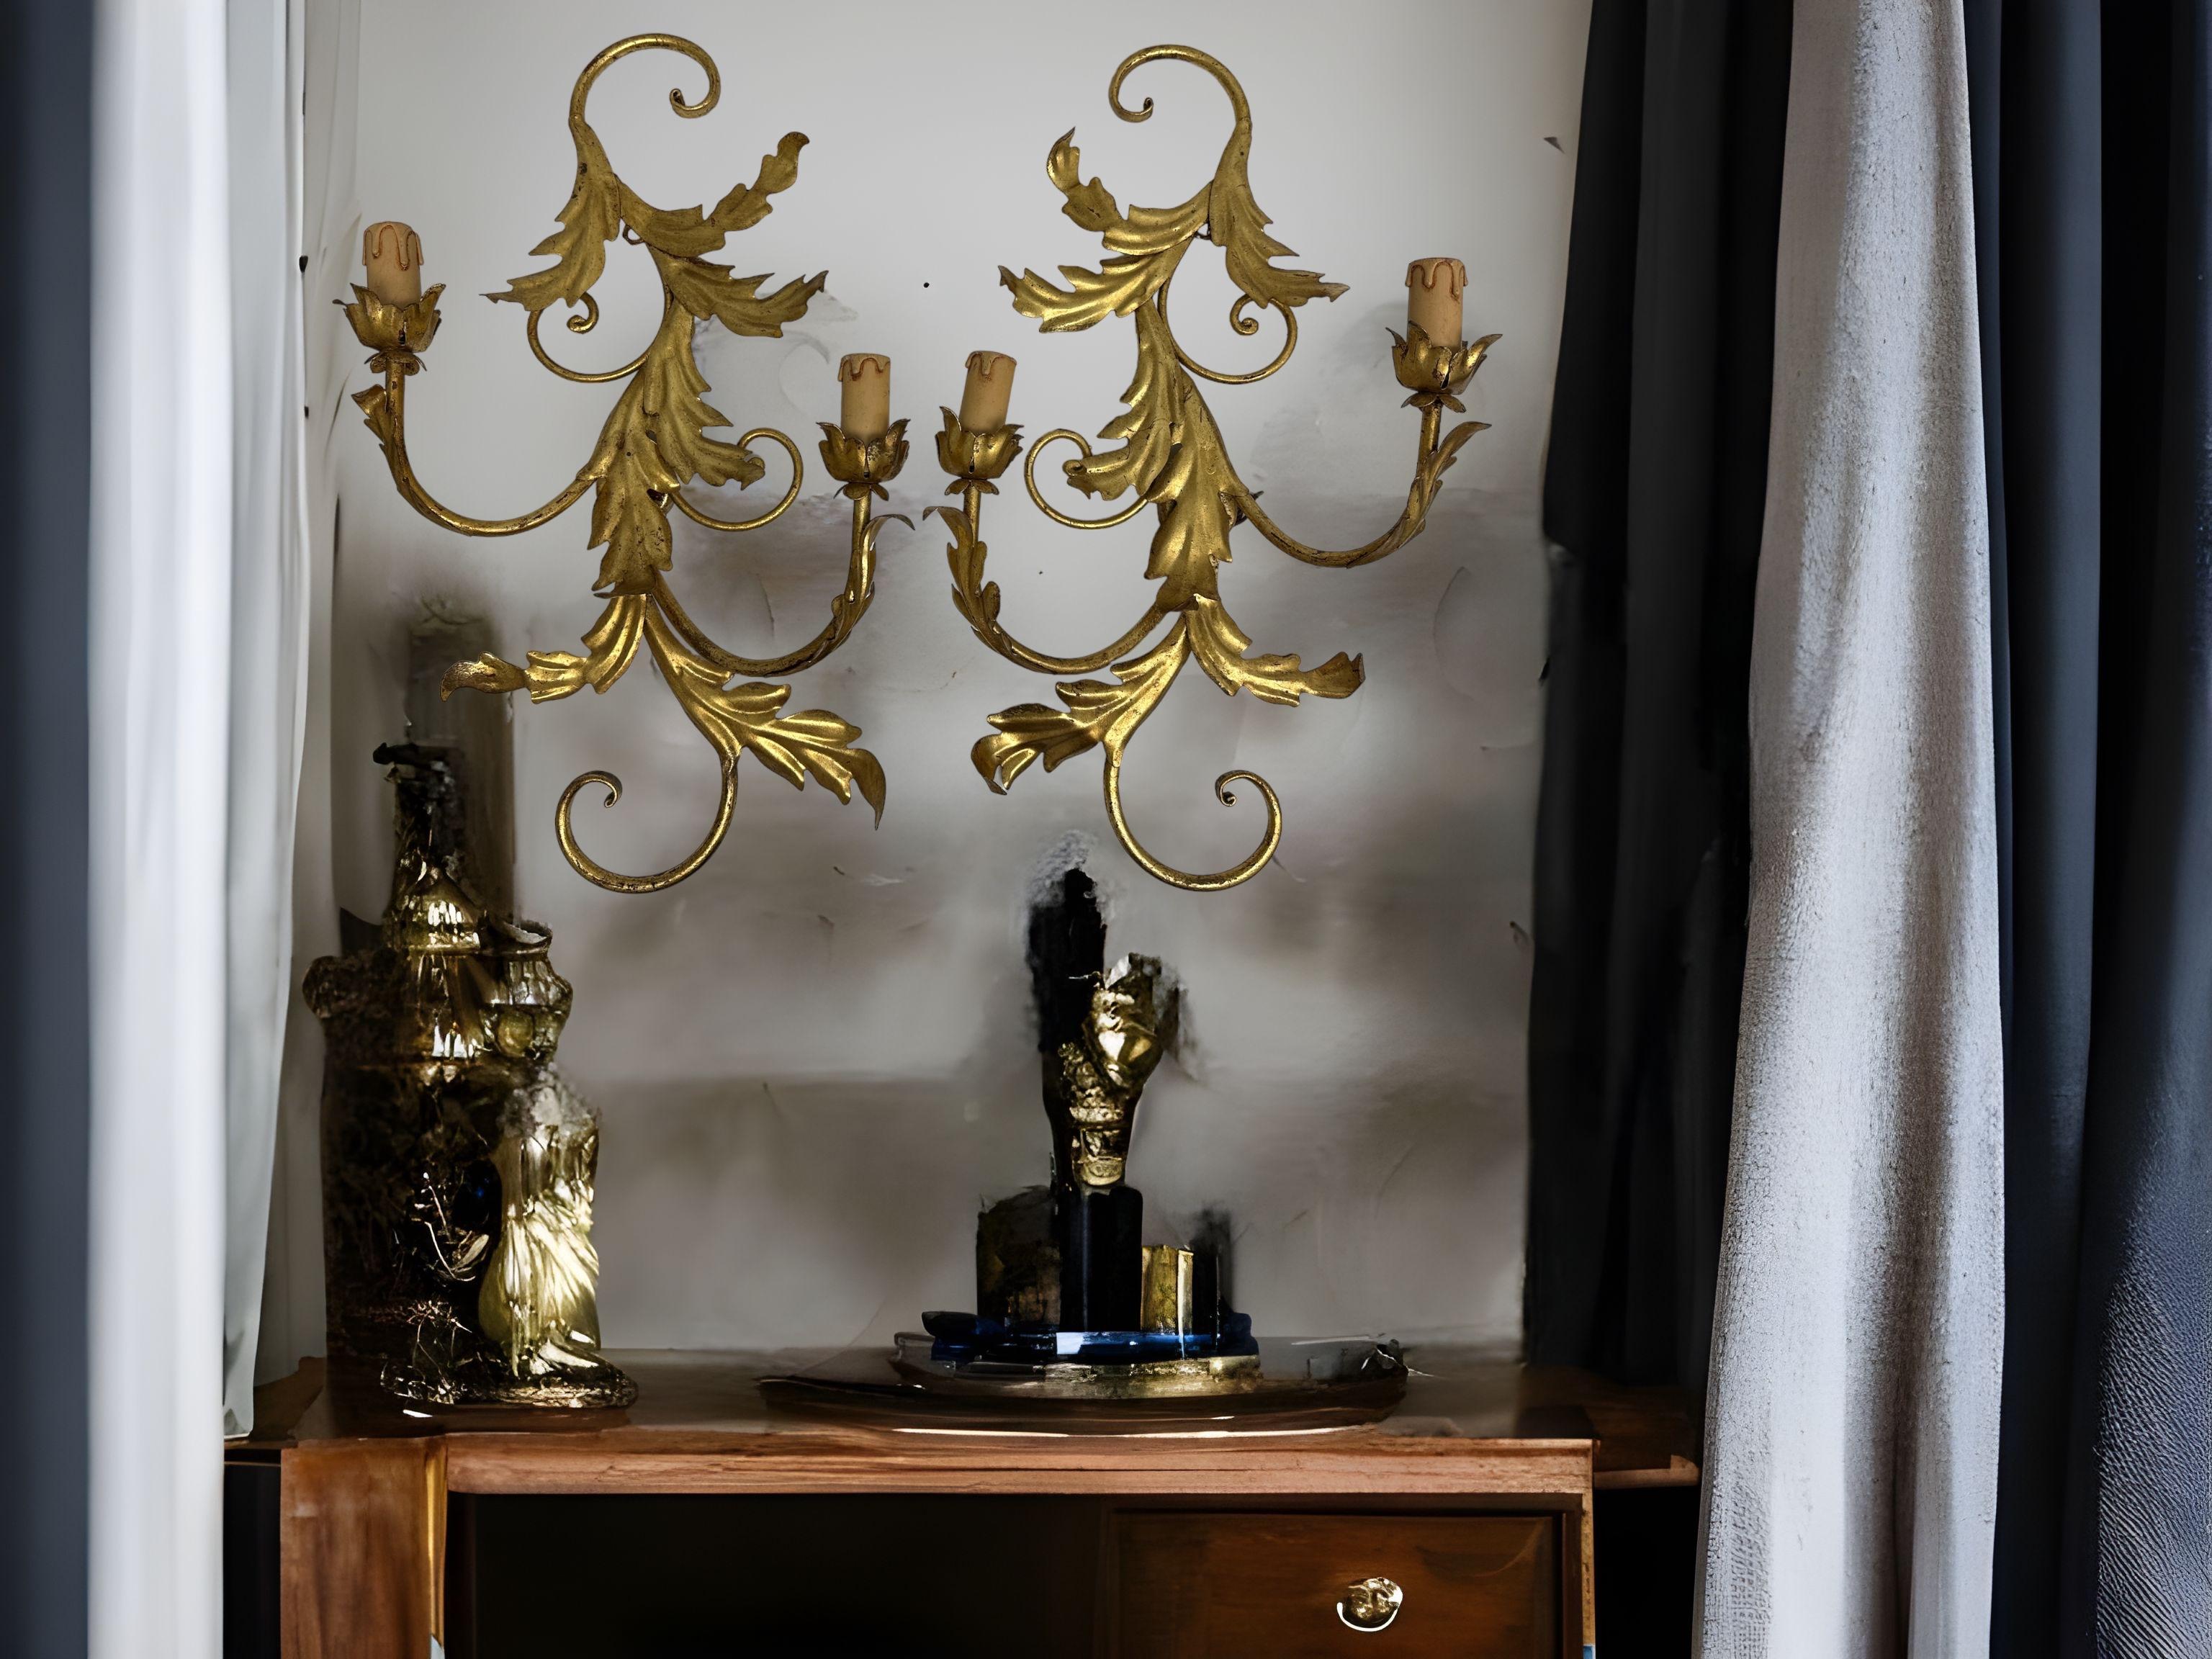 A pair Hollywood Regency midcentury gilt leaf tole sconces, each fixture requires two European E14 candelabra bulbs, each up to 40 watts. The wall lights have a beautiful patina and give each room a eclectic statement. Made by Koegel Kogl Leuchten